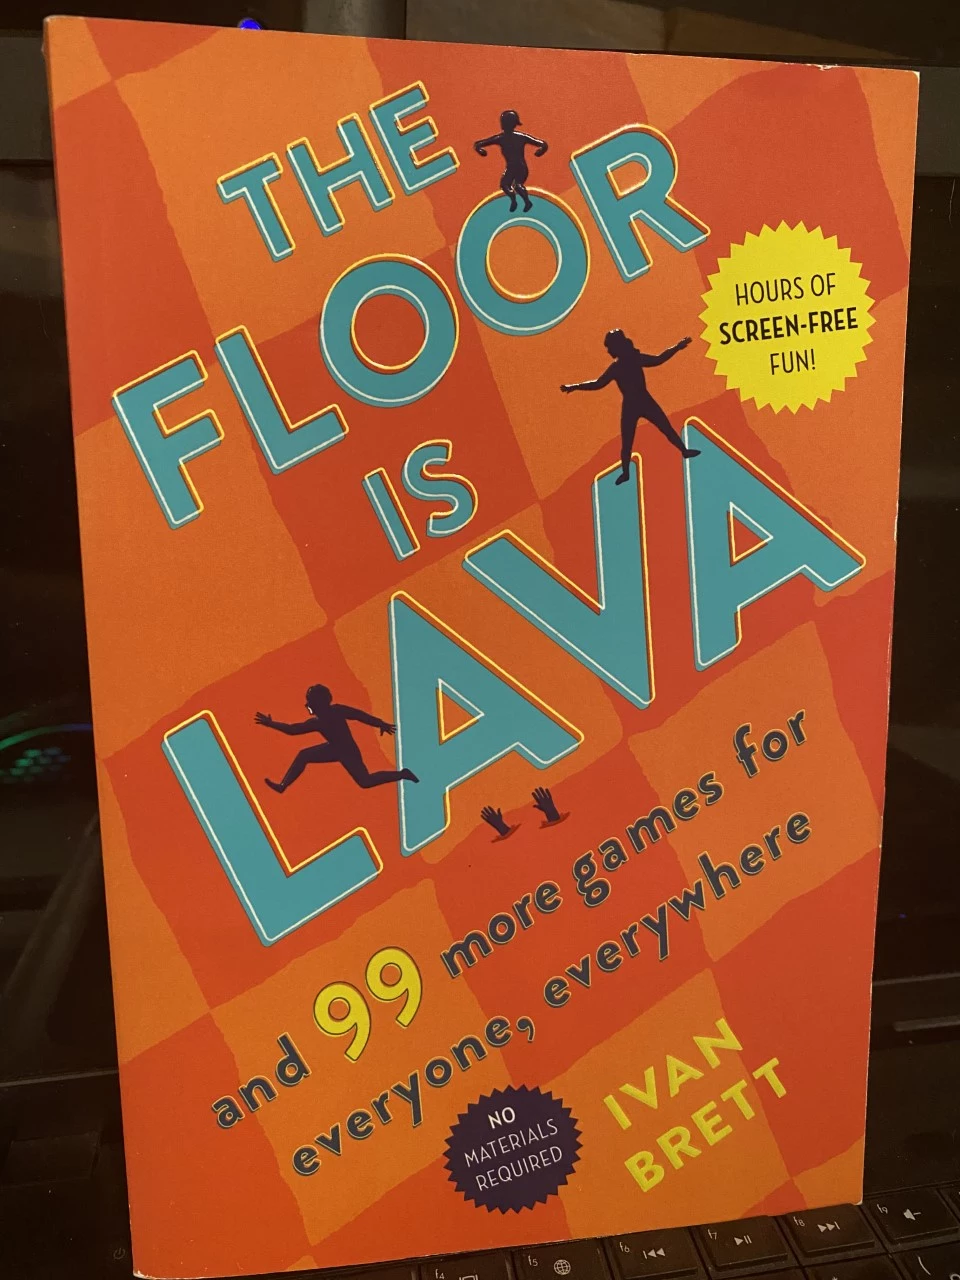 Bored? Games!: 101 games to make every day more playful, from the author of  THE FLOOR IS LAVA by Ivan Brett